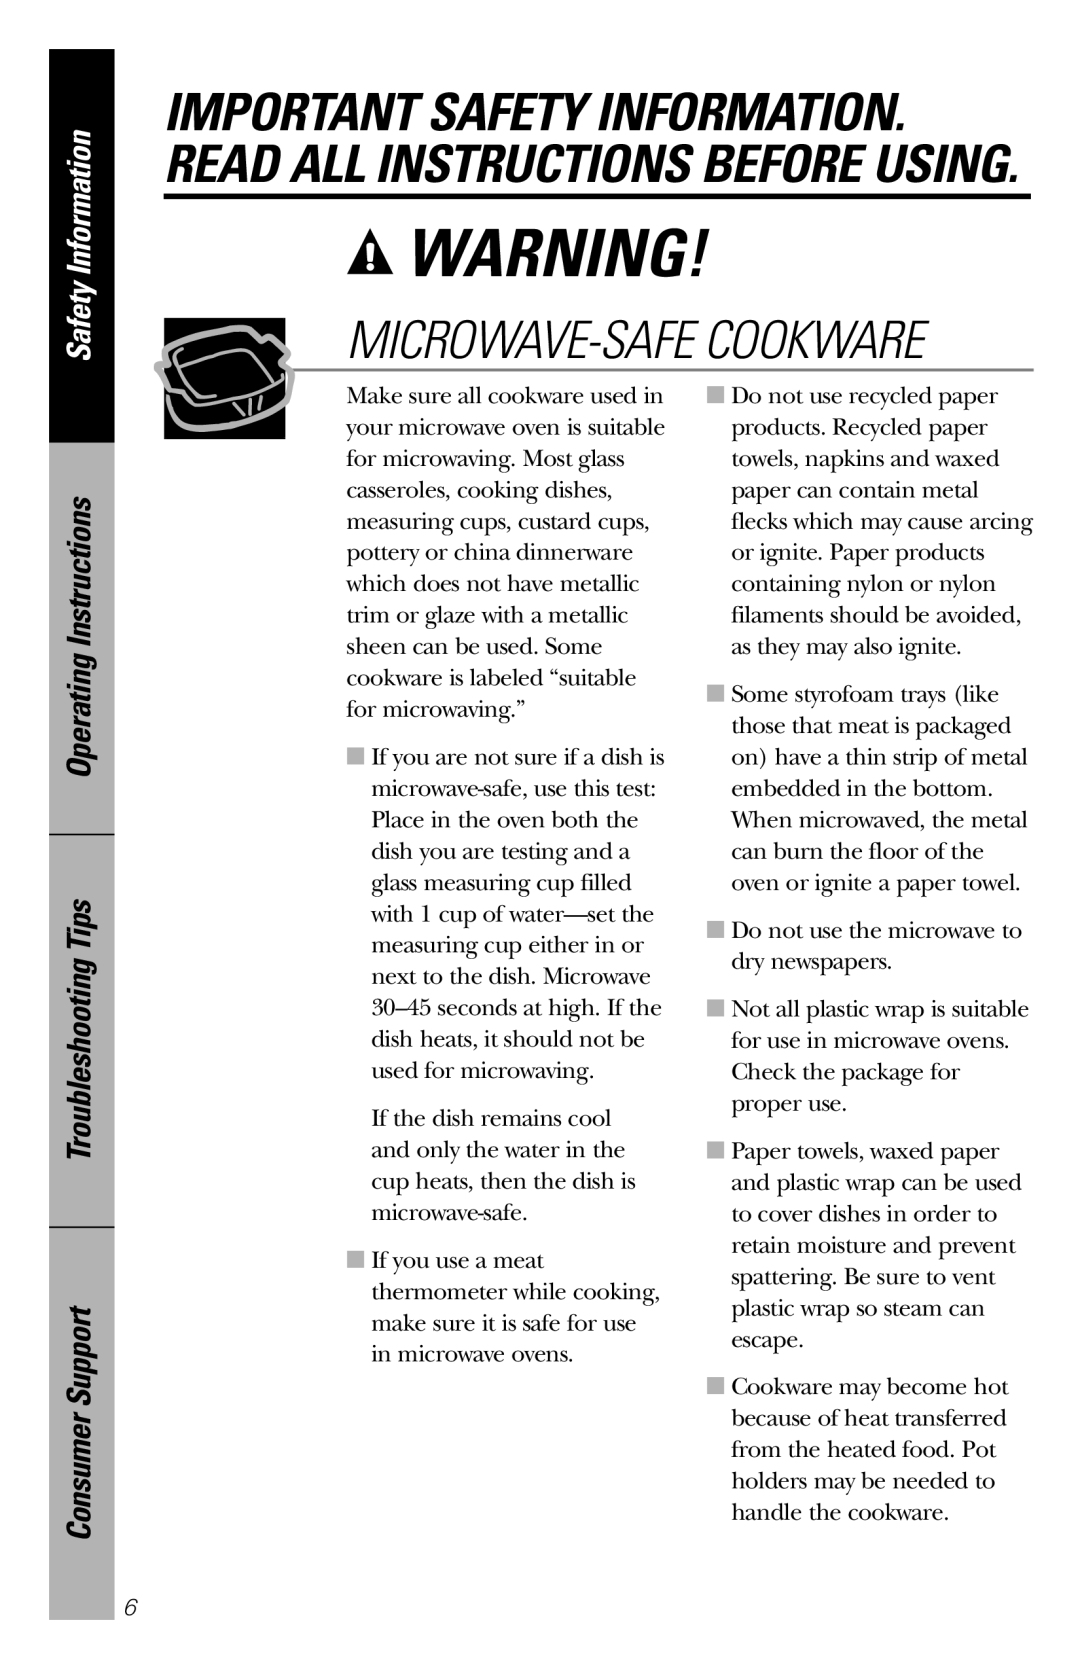 GE JES1358 Microwave-Safecookware, Safety Information, Operating Instructions Troubleshooting Tips, Consumer Support 